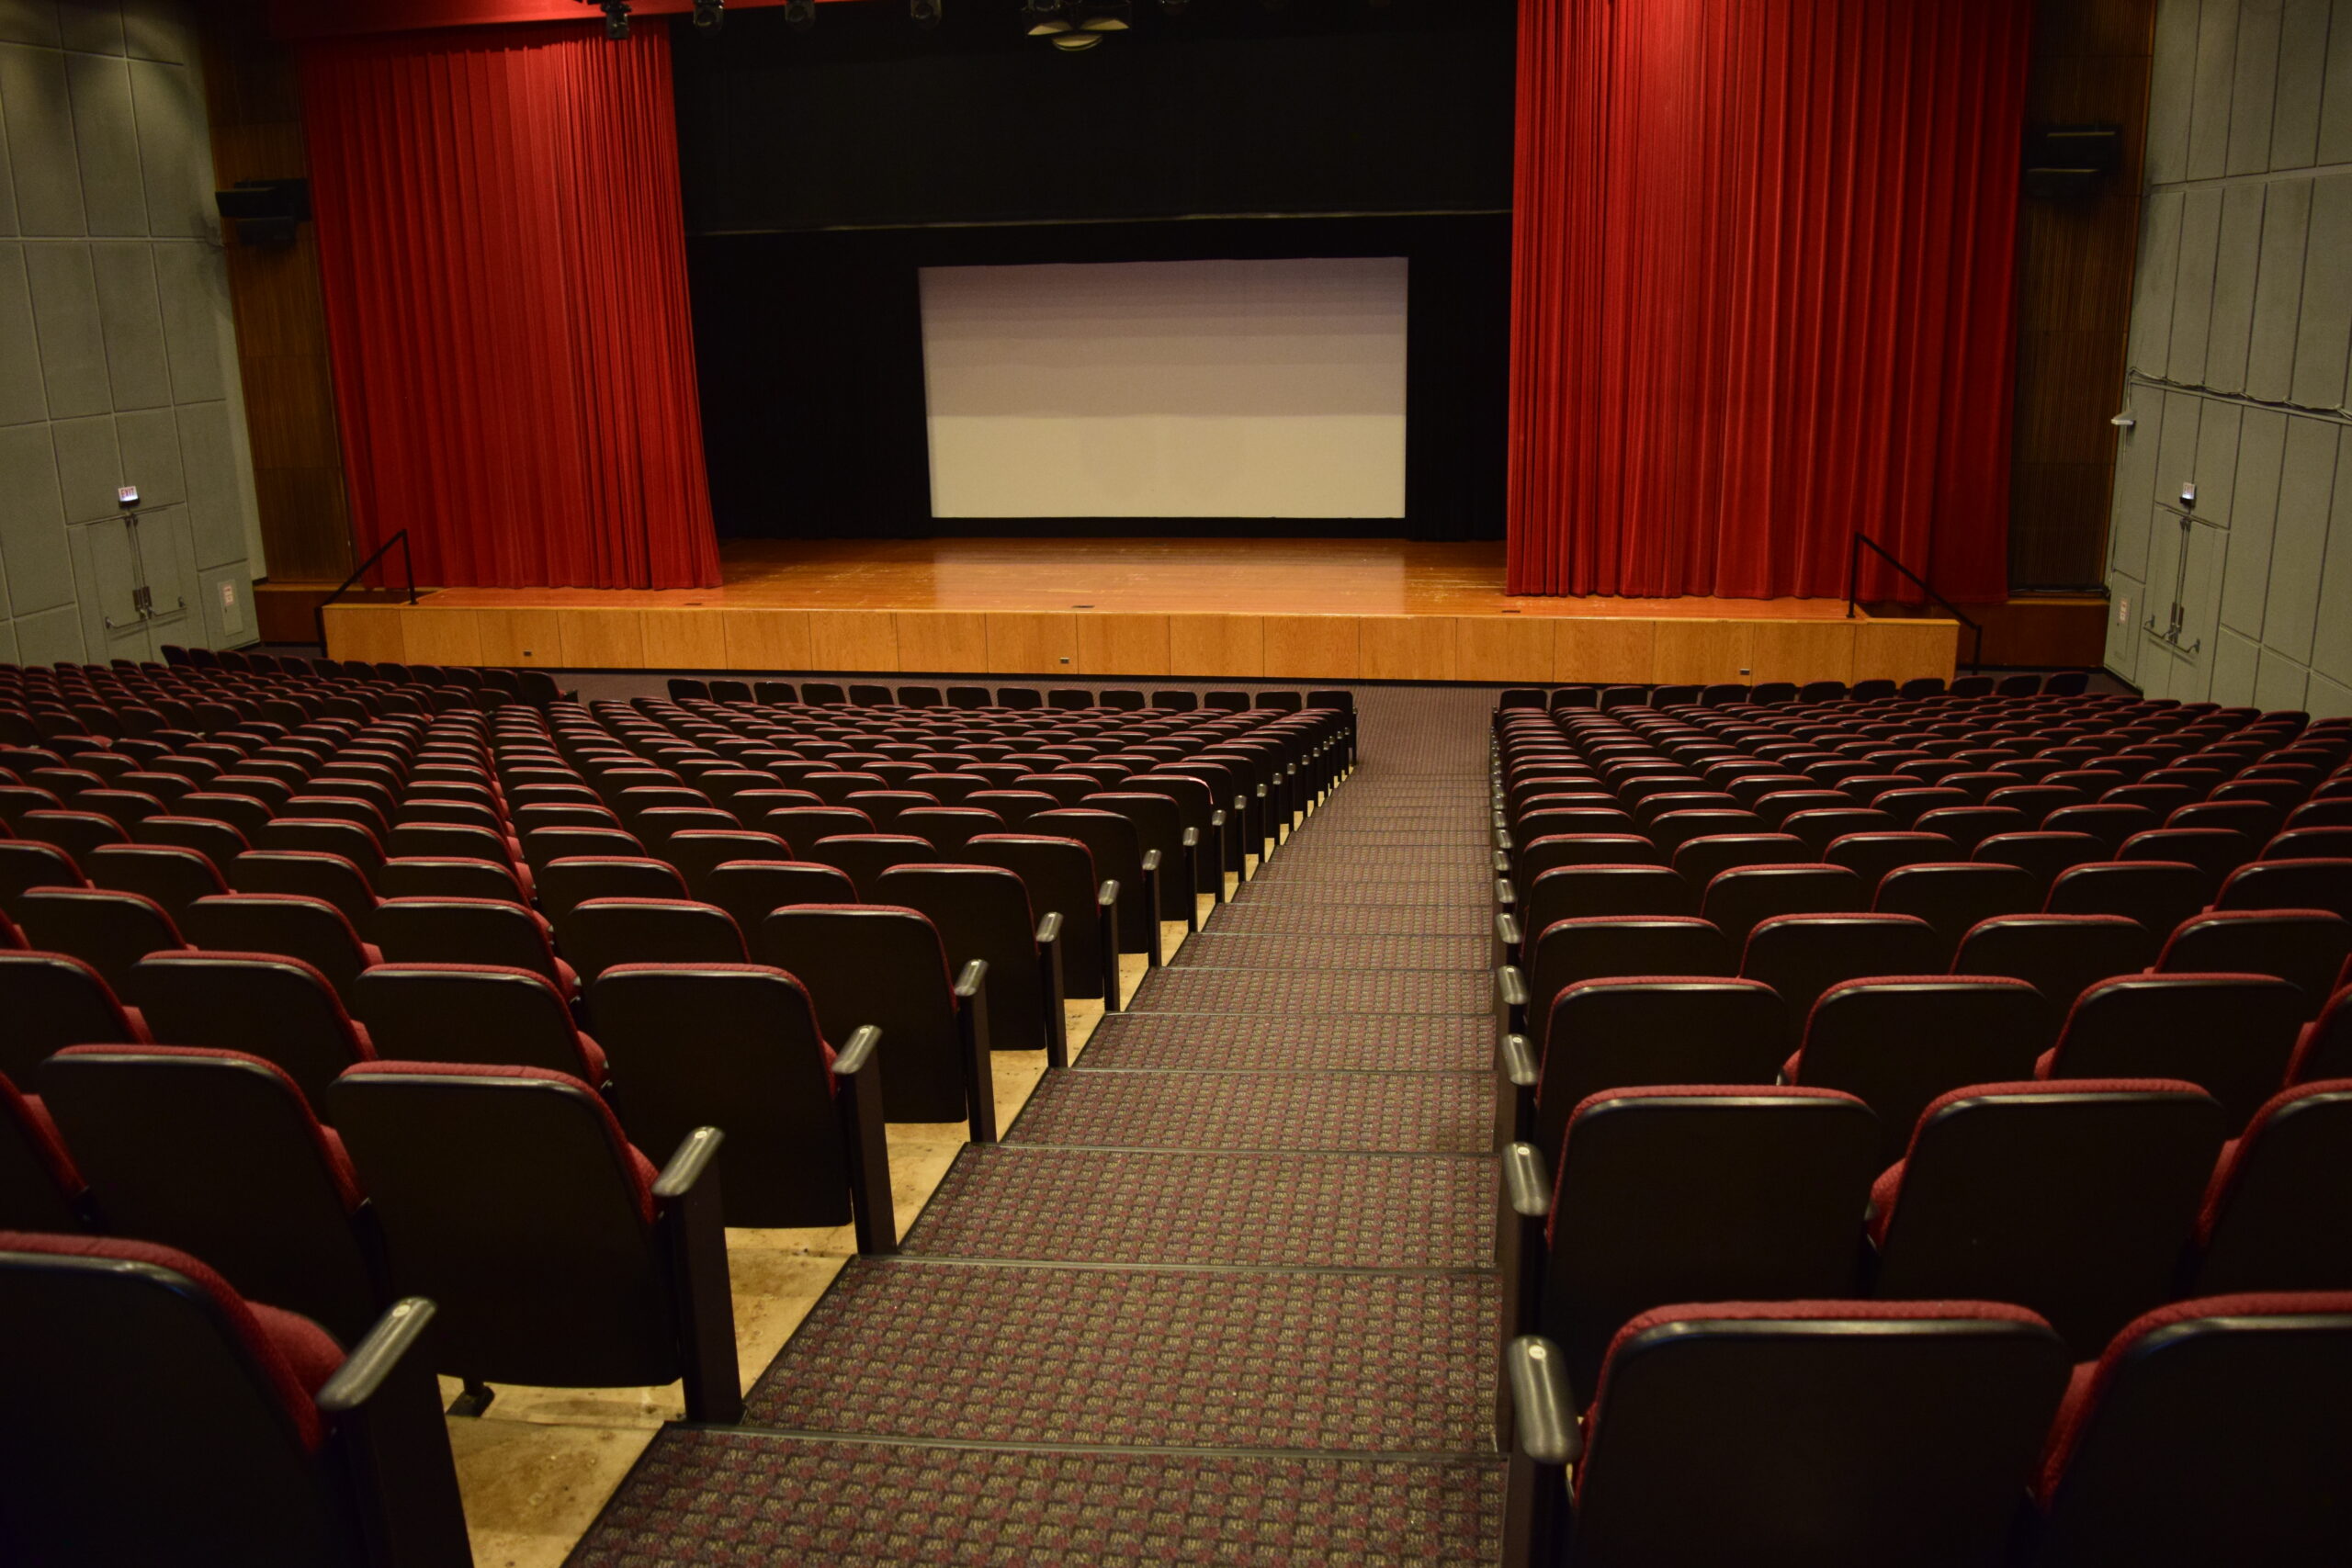 A large auditorium seen from the back, with an aisle descending in long steps with rows of chairs on either side and a stage with a screen in front of the room.